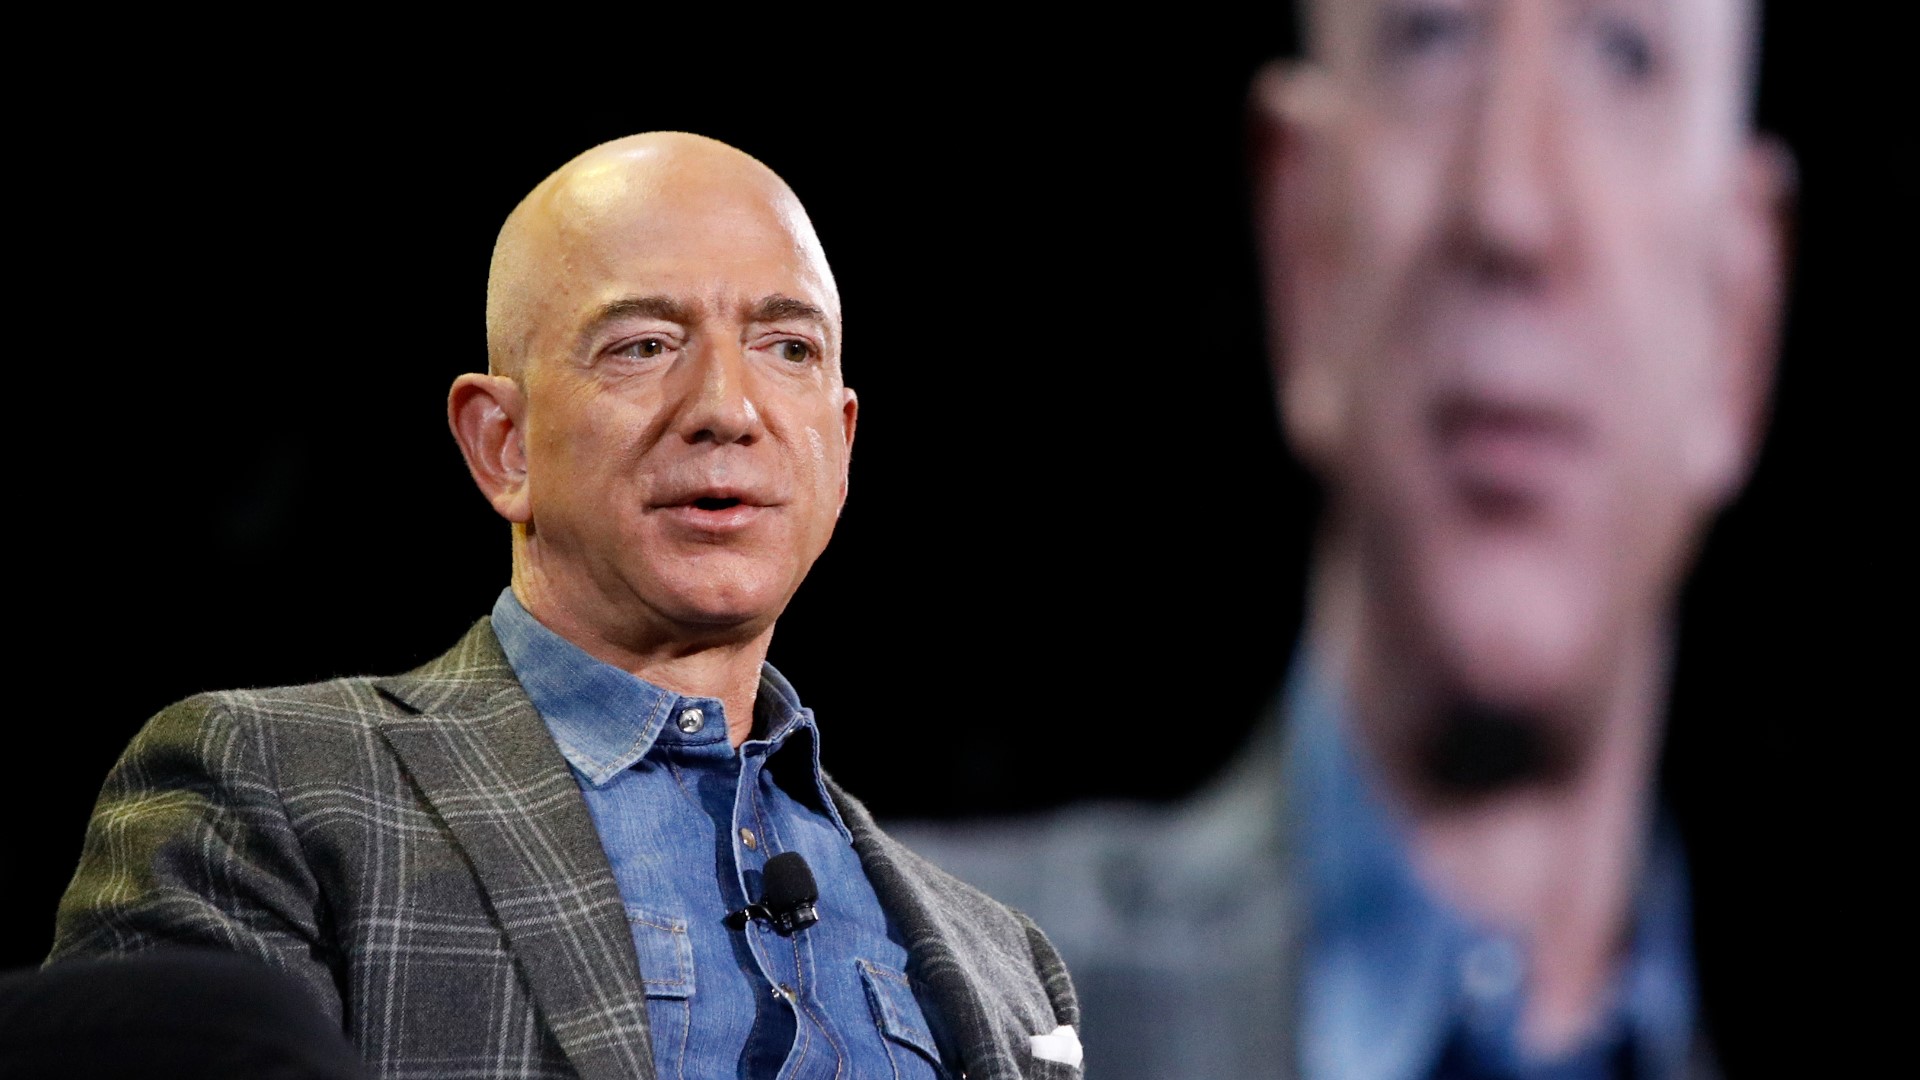 Jeff Bezos filed a statement with federal regulators indicating his sale of nearly 12 million shares of Amazon stock worth more than $2 billion.